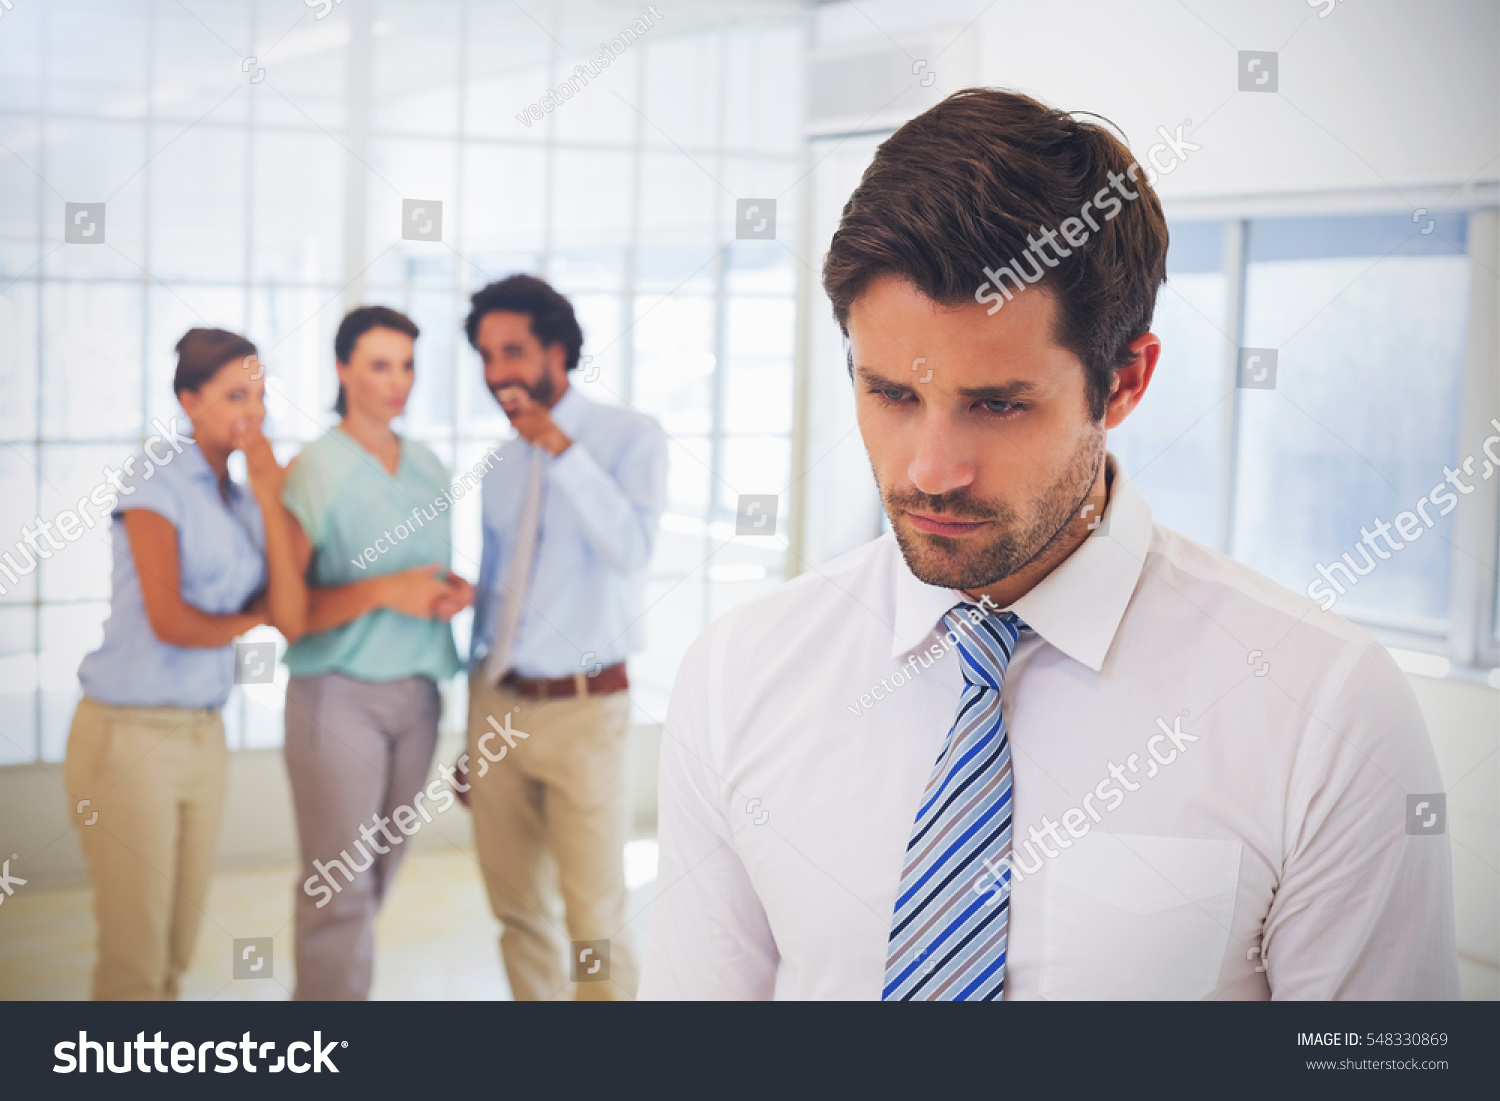 Colleagues gossiping with sad young businessman in foreground at a bright office #548330869